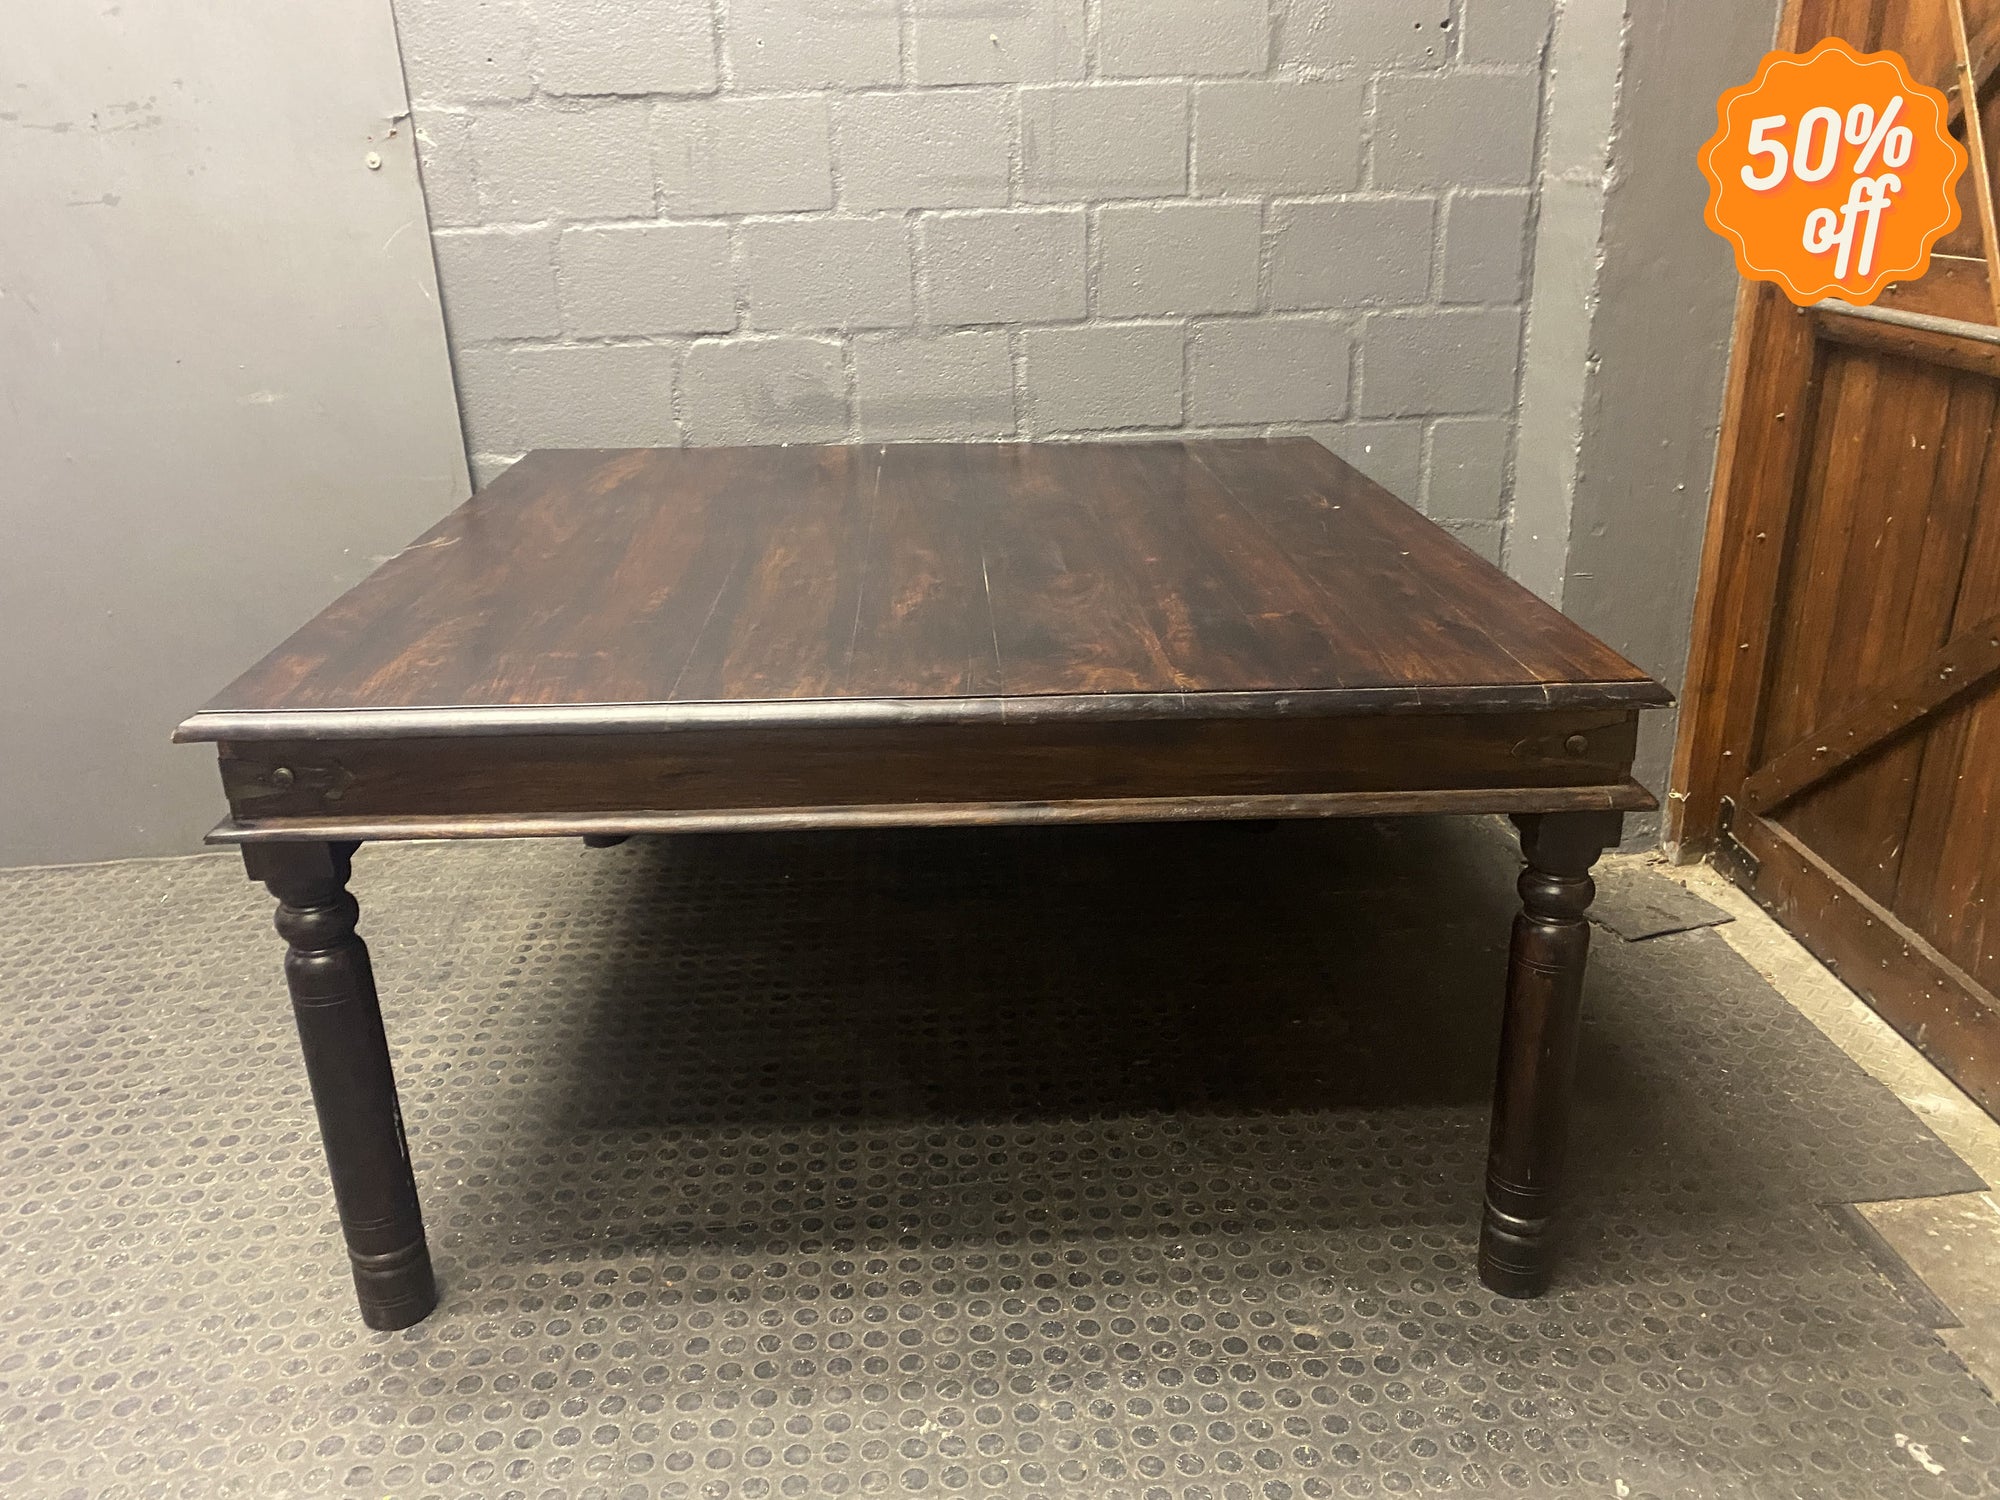 Solid Wooden Table - REDUCED